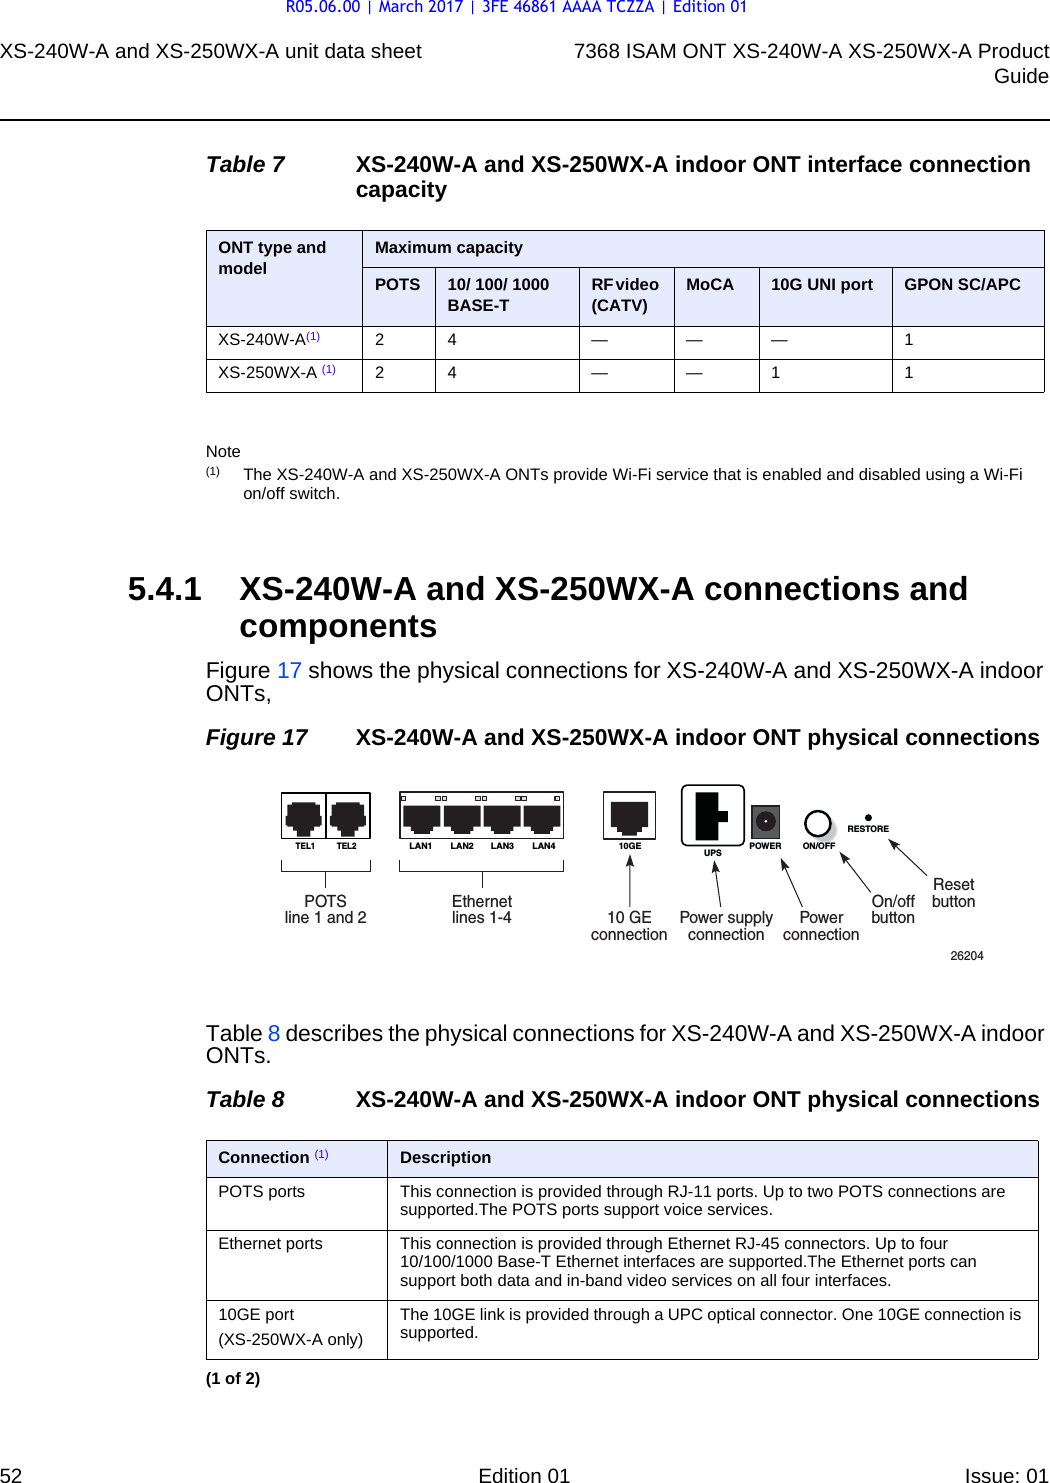 XS-240W-A and XS-250WX-A unit data sheet527368 ISAM ONT XS-240W-A XS-250WX-A ProductGuideEdition 01 Issue: 01 Table 7 XS-240W-A and XS-250WX-A indoor ONT interface connection capacityNote(1) The XS-240W-A and XS-250WX-A ONTs provide Wi-Fi service that is enabled and disabled using a Wi-Fi on/off switch. 5.4.1 XS-240W-A and XS-250WX-A connections and componentsFigure 17 shows the physical connections for XS-240W-A and XS-250WX-A indoor ONTs, Figure 17 XS-240W-A and XS-250WX-A indoor ONT physical connectionsTable 8 describes the physical connections for XS-240W-A and XS-250WX-A indoor ONTs.Table 8 XS-240W-A and XS-250WX-A indoor ONT physical connectionsONT type and model  Maximum capacityPOTS 10/ 100/ 1000 BASE-T RF video (CATV) MoCA 10G UNI port GPON SC/APCXS-240W-A(1) 24 — — — 1XS-250WX-A (1) 24 — — 1 1Connection (1) DescriptionPOTS ports This connection is provided through RJ-11 ports. Up to two POTS connections are supported.The POTS ports support voice services. Ethernet ports This connection is provided through Ethernet RJ-45 connectors. Up to four 10/100/1000 Base-T Ethernet interfaces are supported.The Ethernet ports can support both data and in-band video services on all four interfaces.10GE port(XS-250WX-A only)The 10GE link is provided through a UPC optical connector. One 10GE connection is supported.(1 of 2)26204TEL1 TEL2LAN1 LAN2 LAN3 LAN4 10GEPOWERUPSON/OFFRESTOREPOTSline 1 and 2Ethernetlines 1-4 10 GEconnectionPower supplyconnectionPowerconnectionOn/offbuttonResetbuttonR05.06.00 | March 2017 | 3FE 46861 AAAA TCZZA | Edition 01